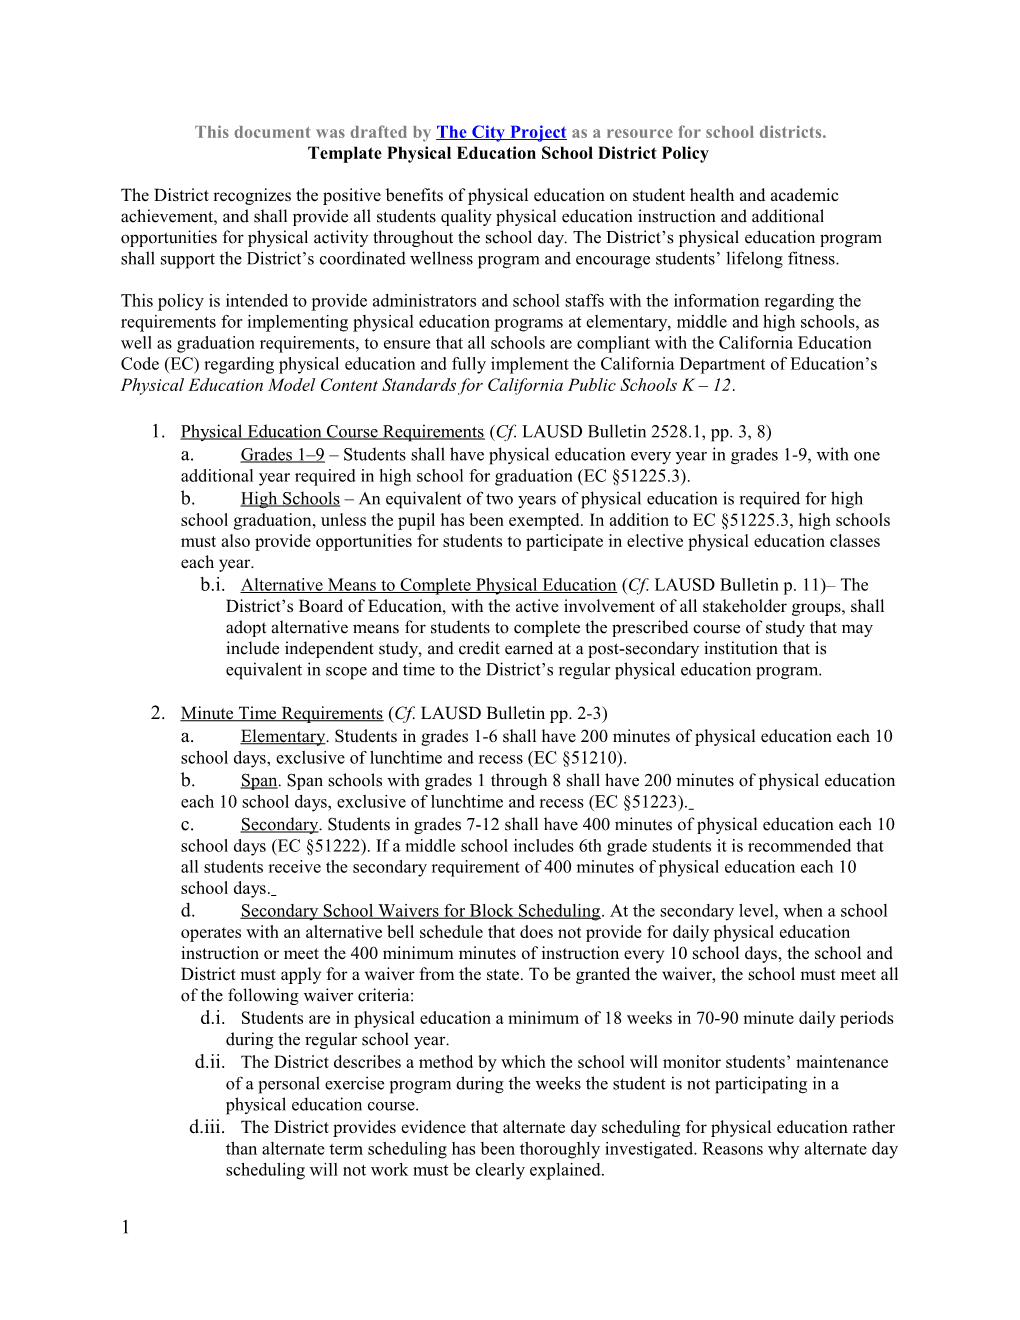 This Document Was Drafted by the City Project As a Resource for School Districts